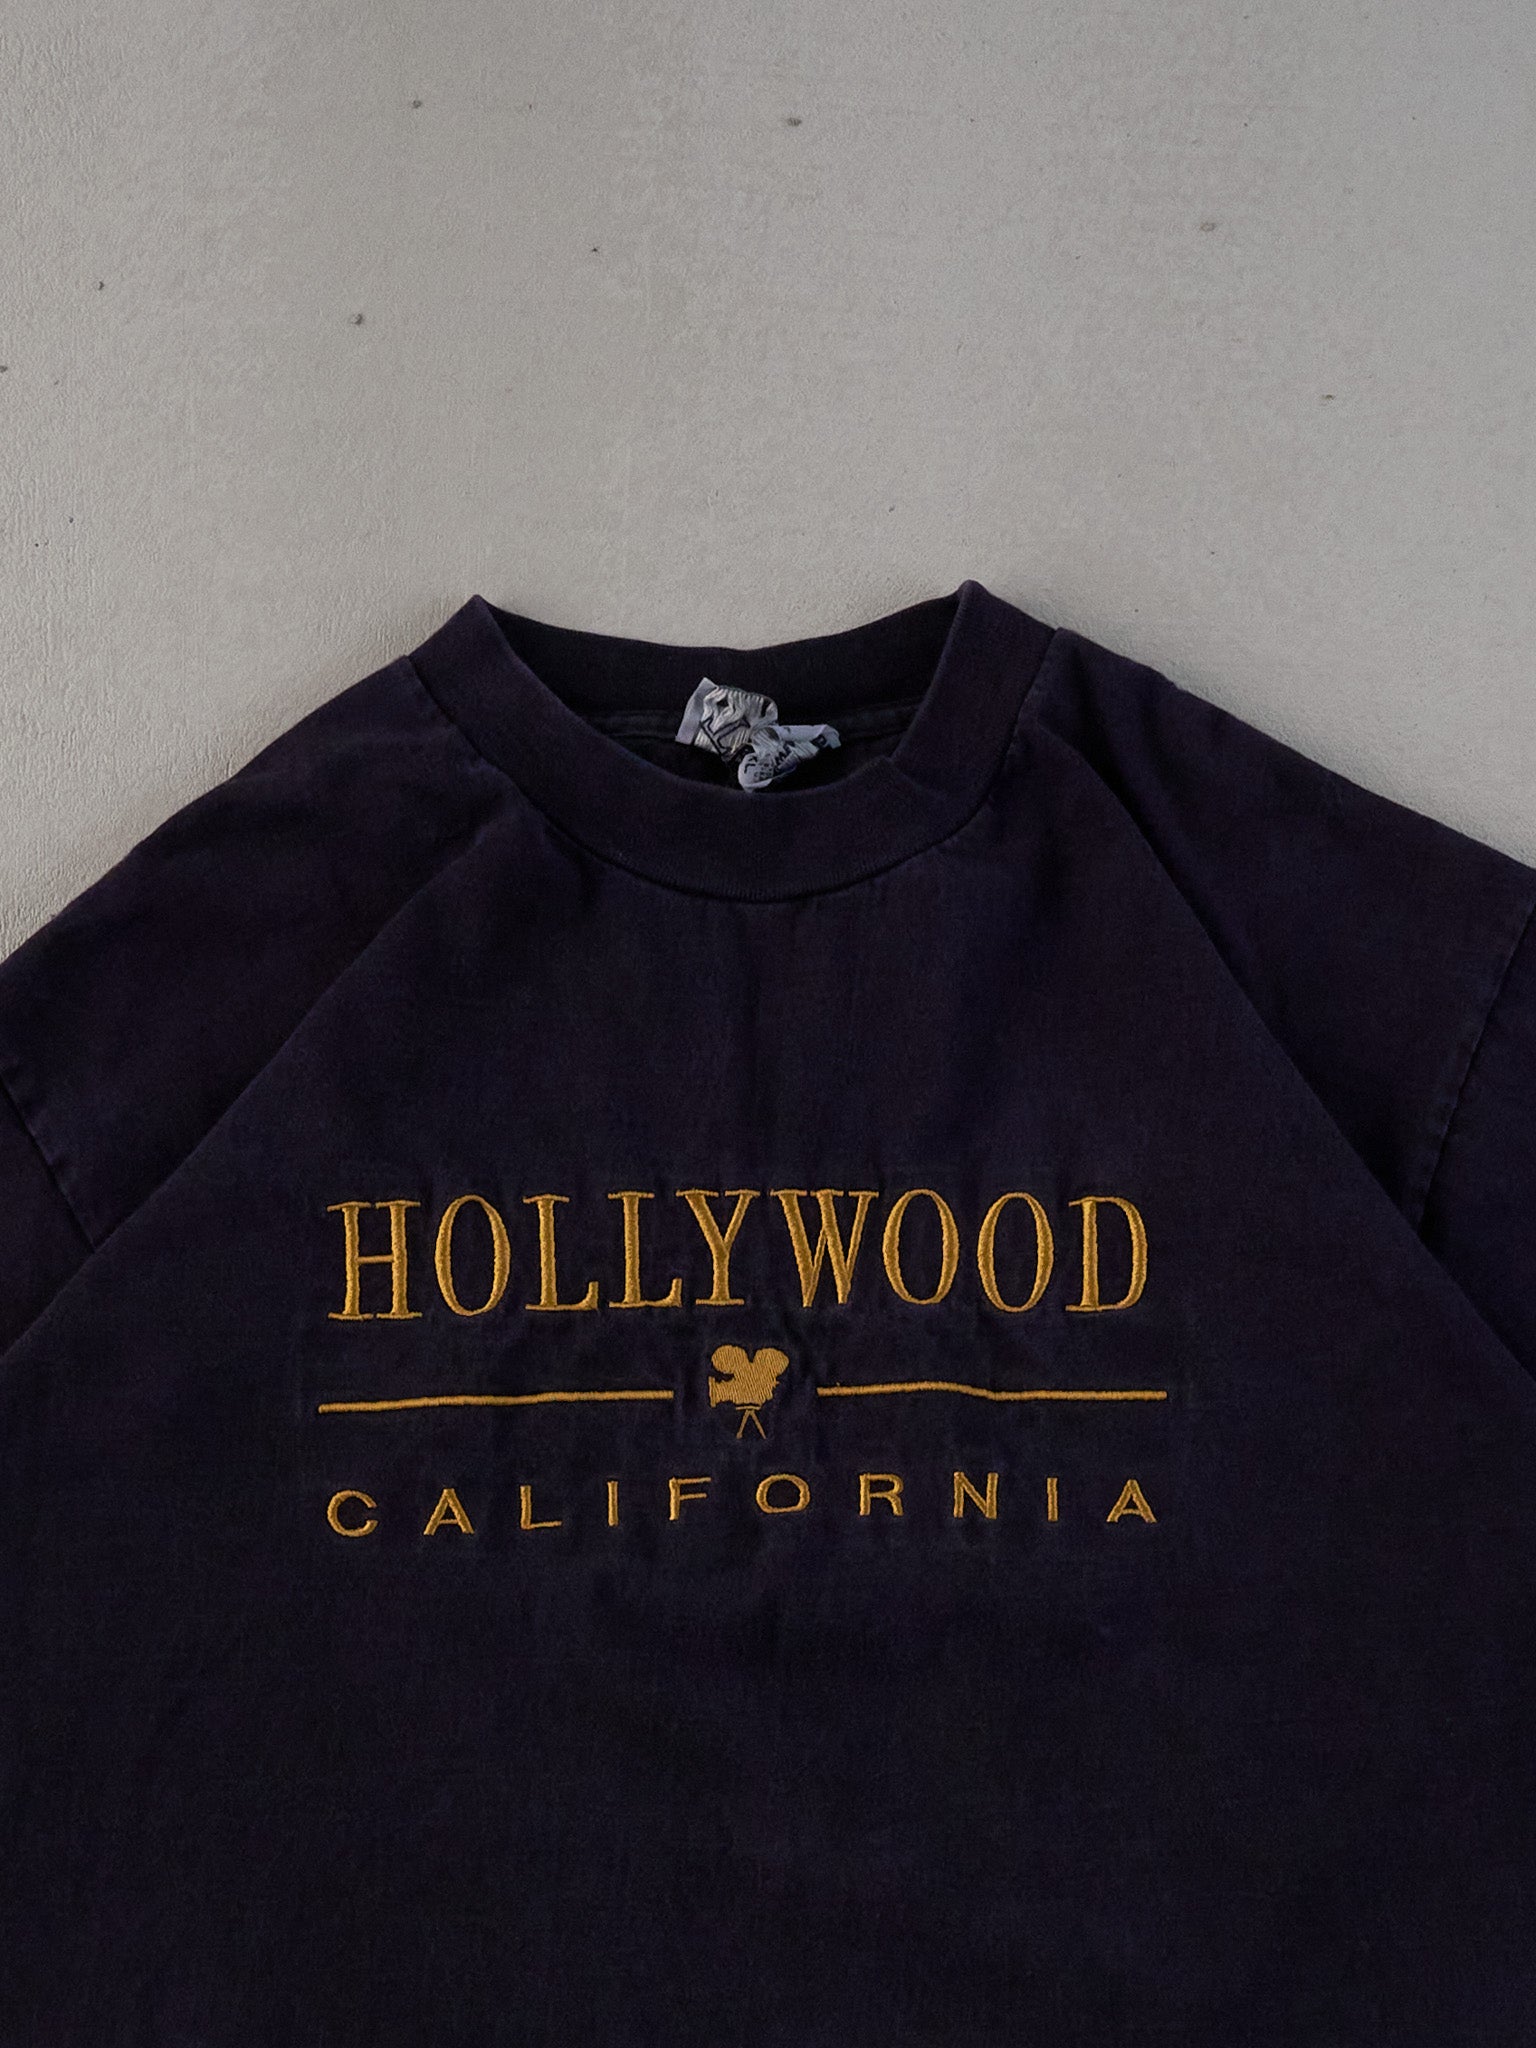 Vintage 90s Single Stitched Black Hollywood California Graphic Tee (M)